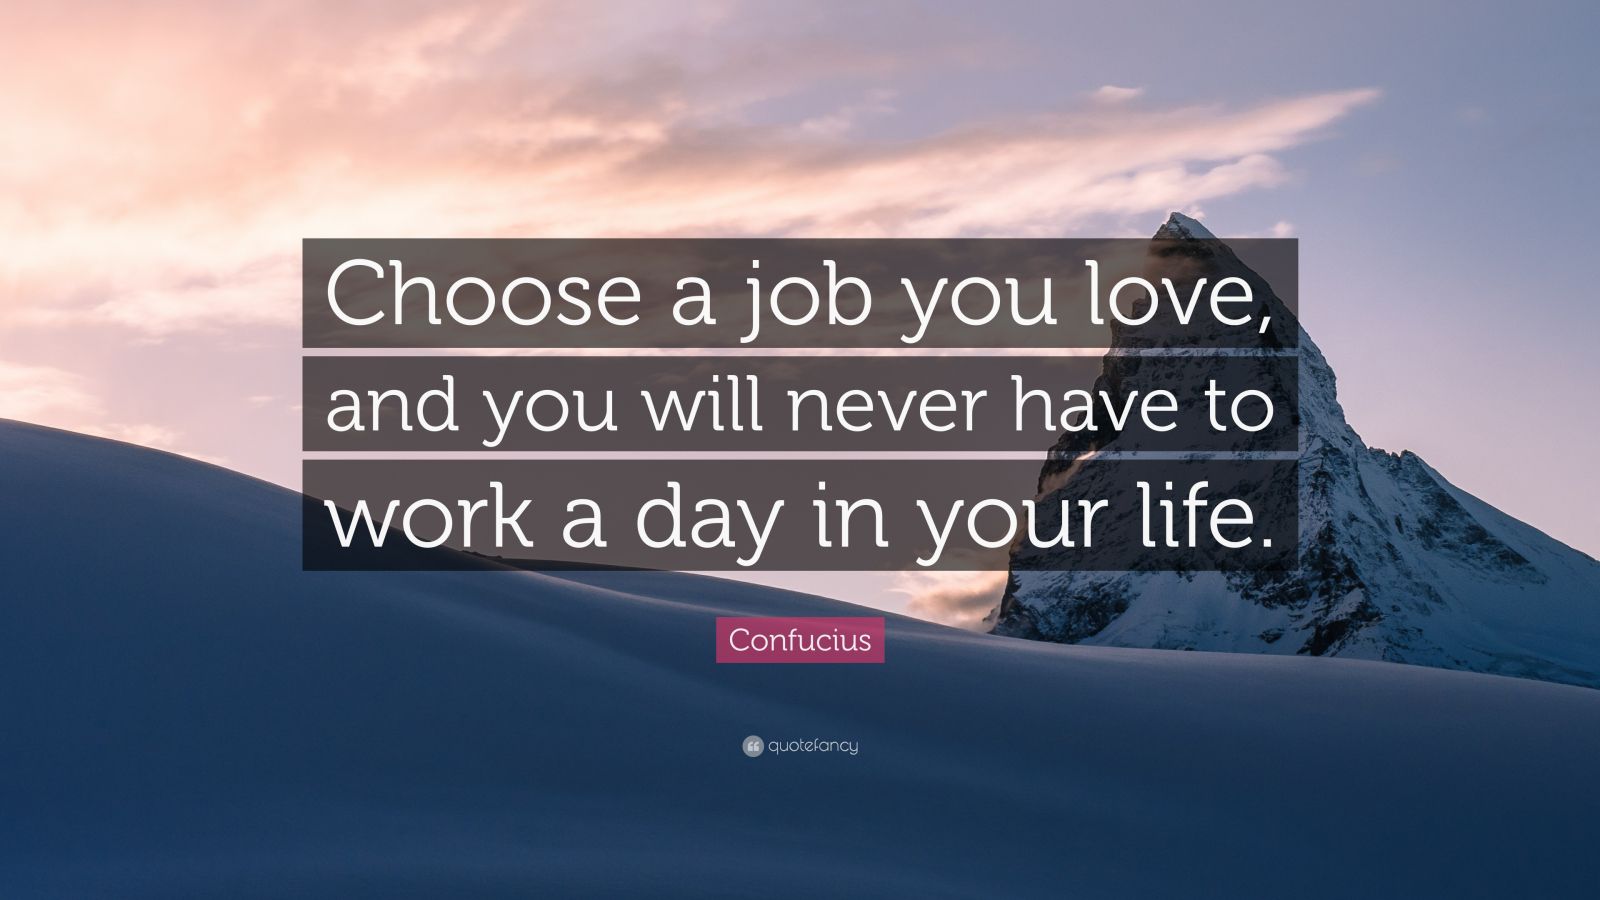 Confucius Quote “Choose a job you love, and you will